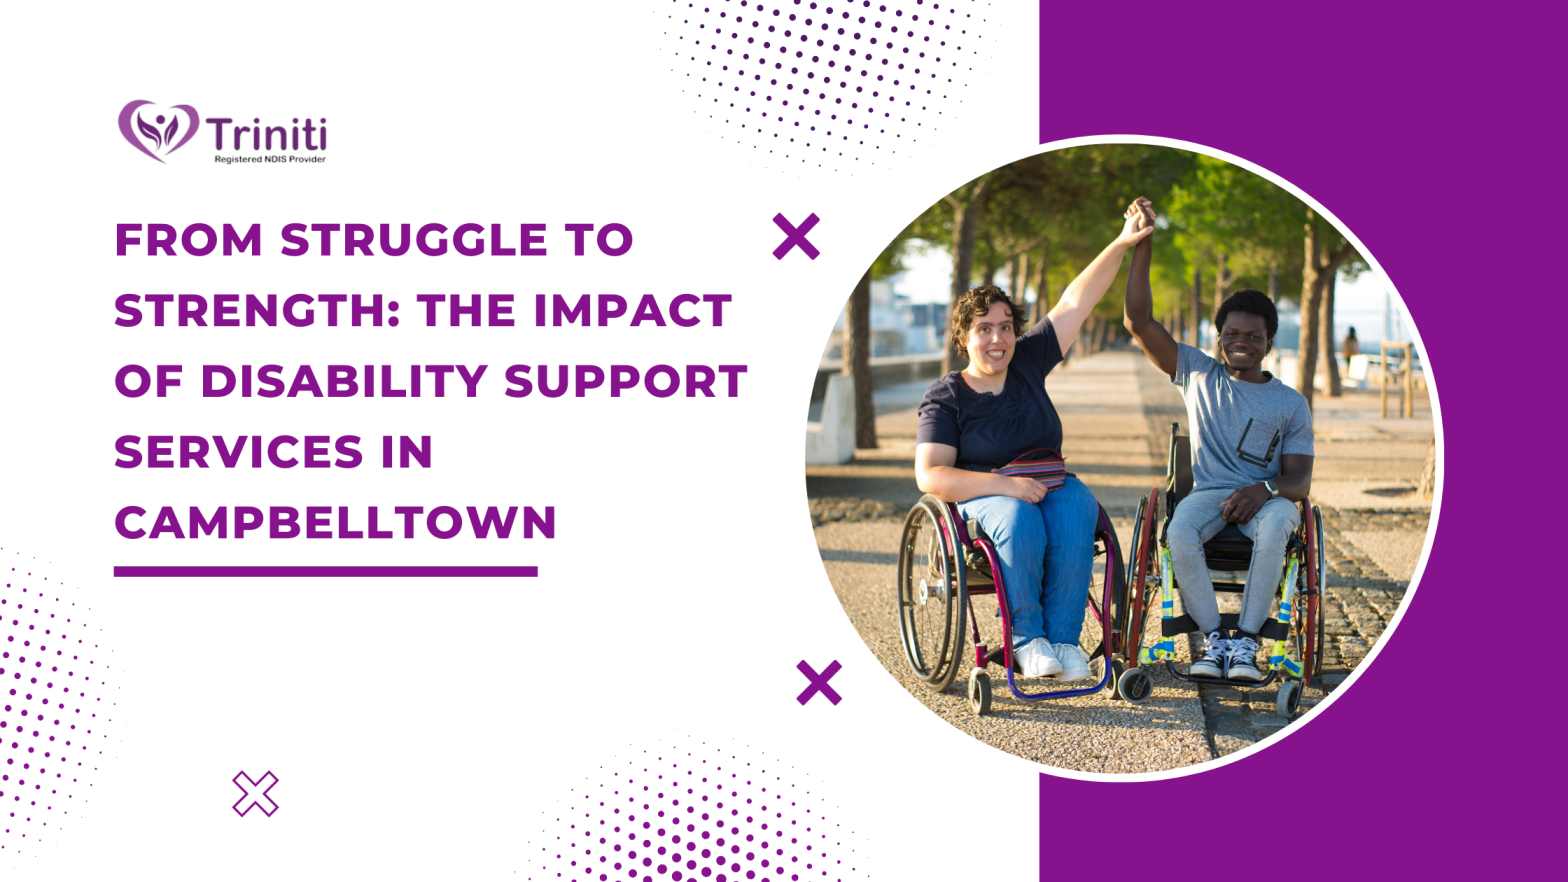 From Struggle to Strength: The Impact of Disability Support Services in Campbelltown